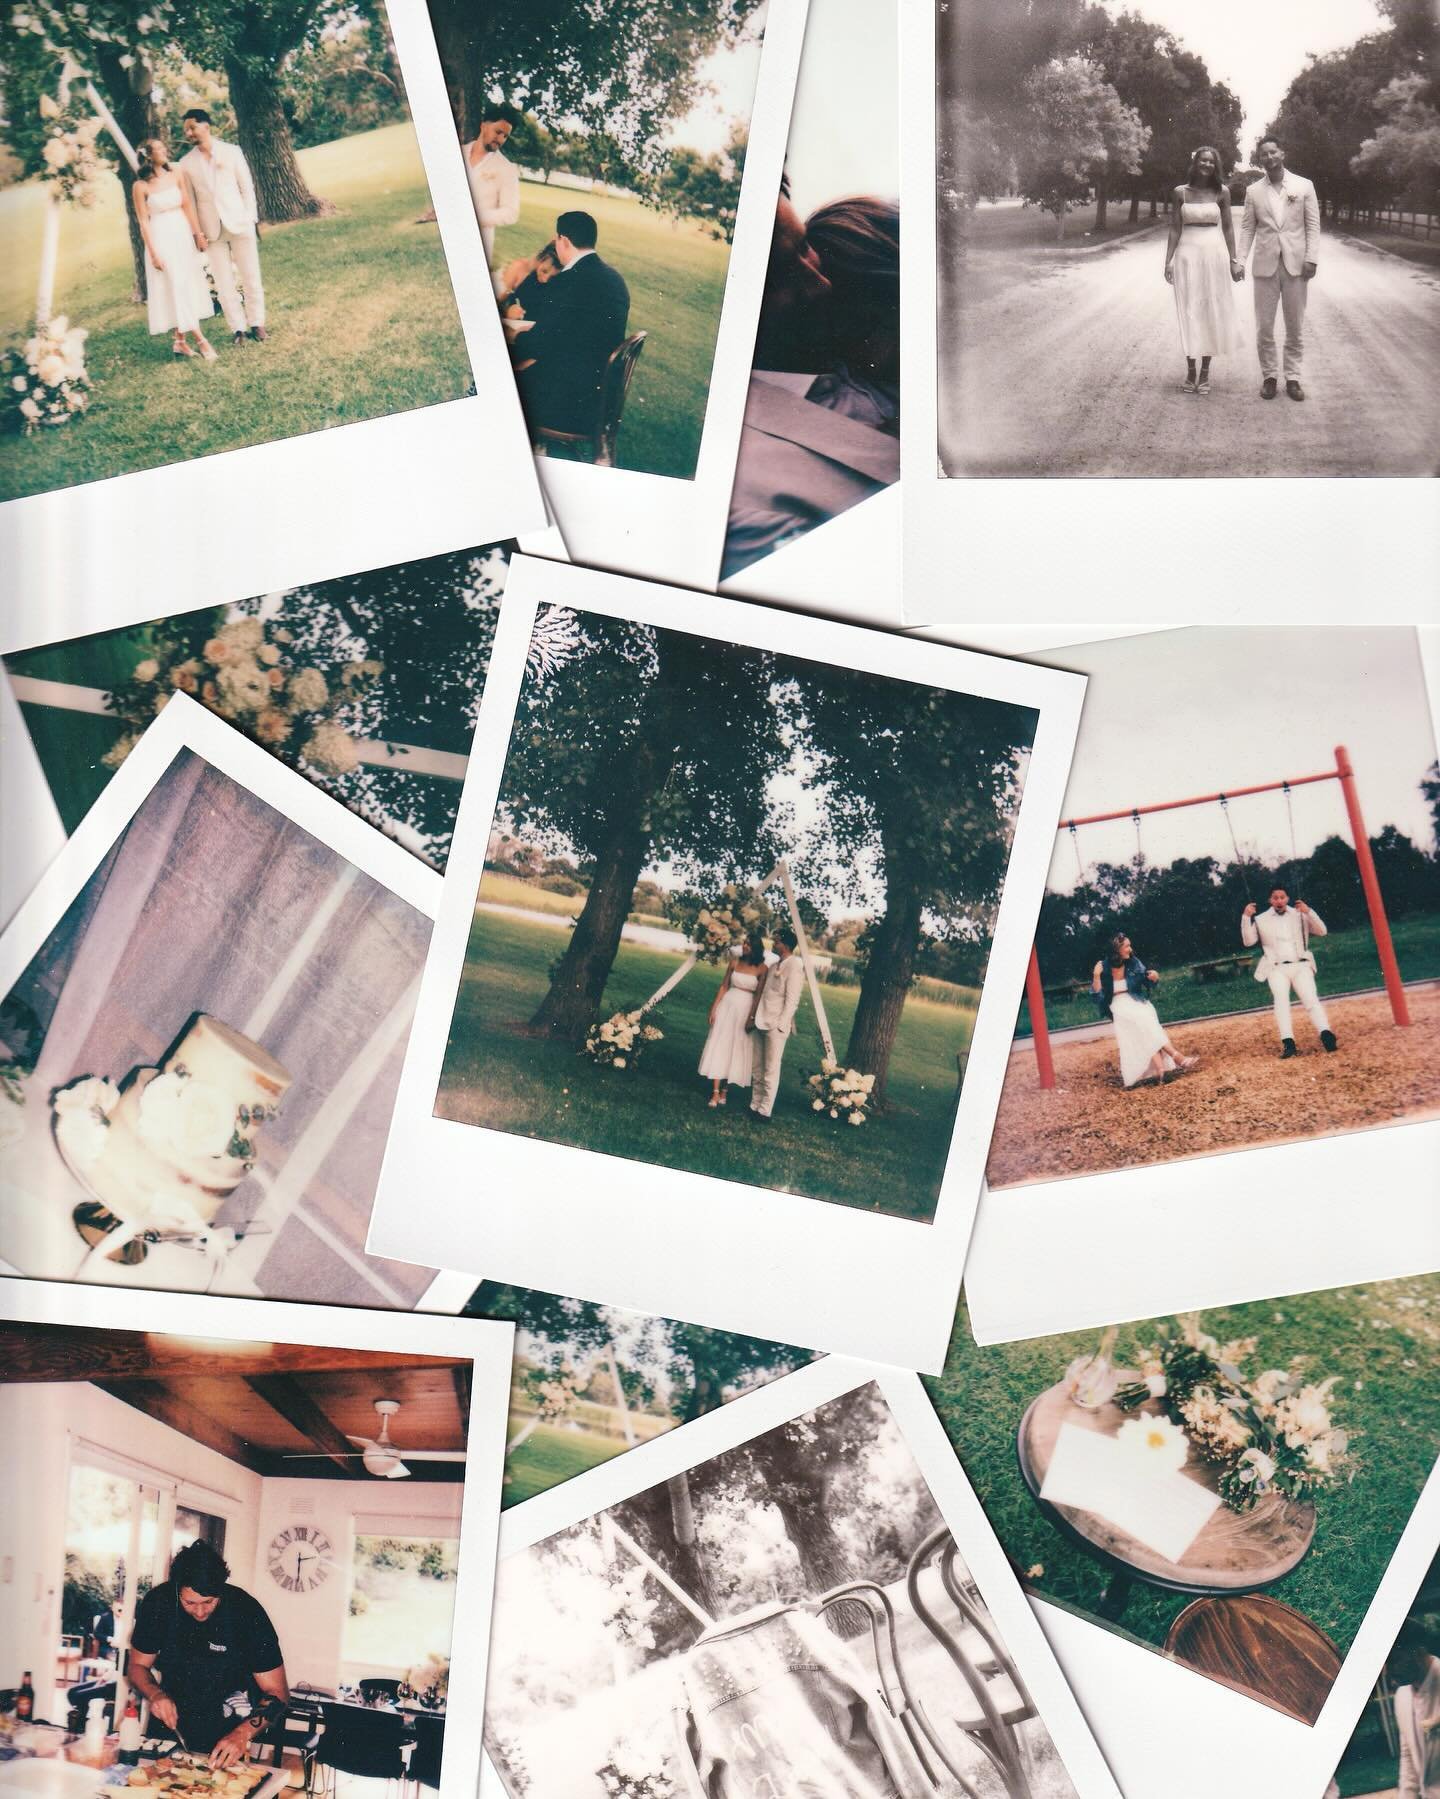 The absolute gems that are Charlotte &amp; Luke on Polaroids. All unique, never to be replicated.

#melbourneweddingphotographer #melbournewedding #weddingphotographer #weddingphotography #weddingphotographymelbourne #weddingphotographermelbourne #me